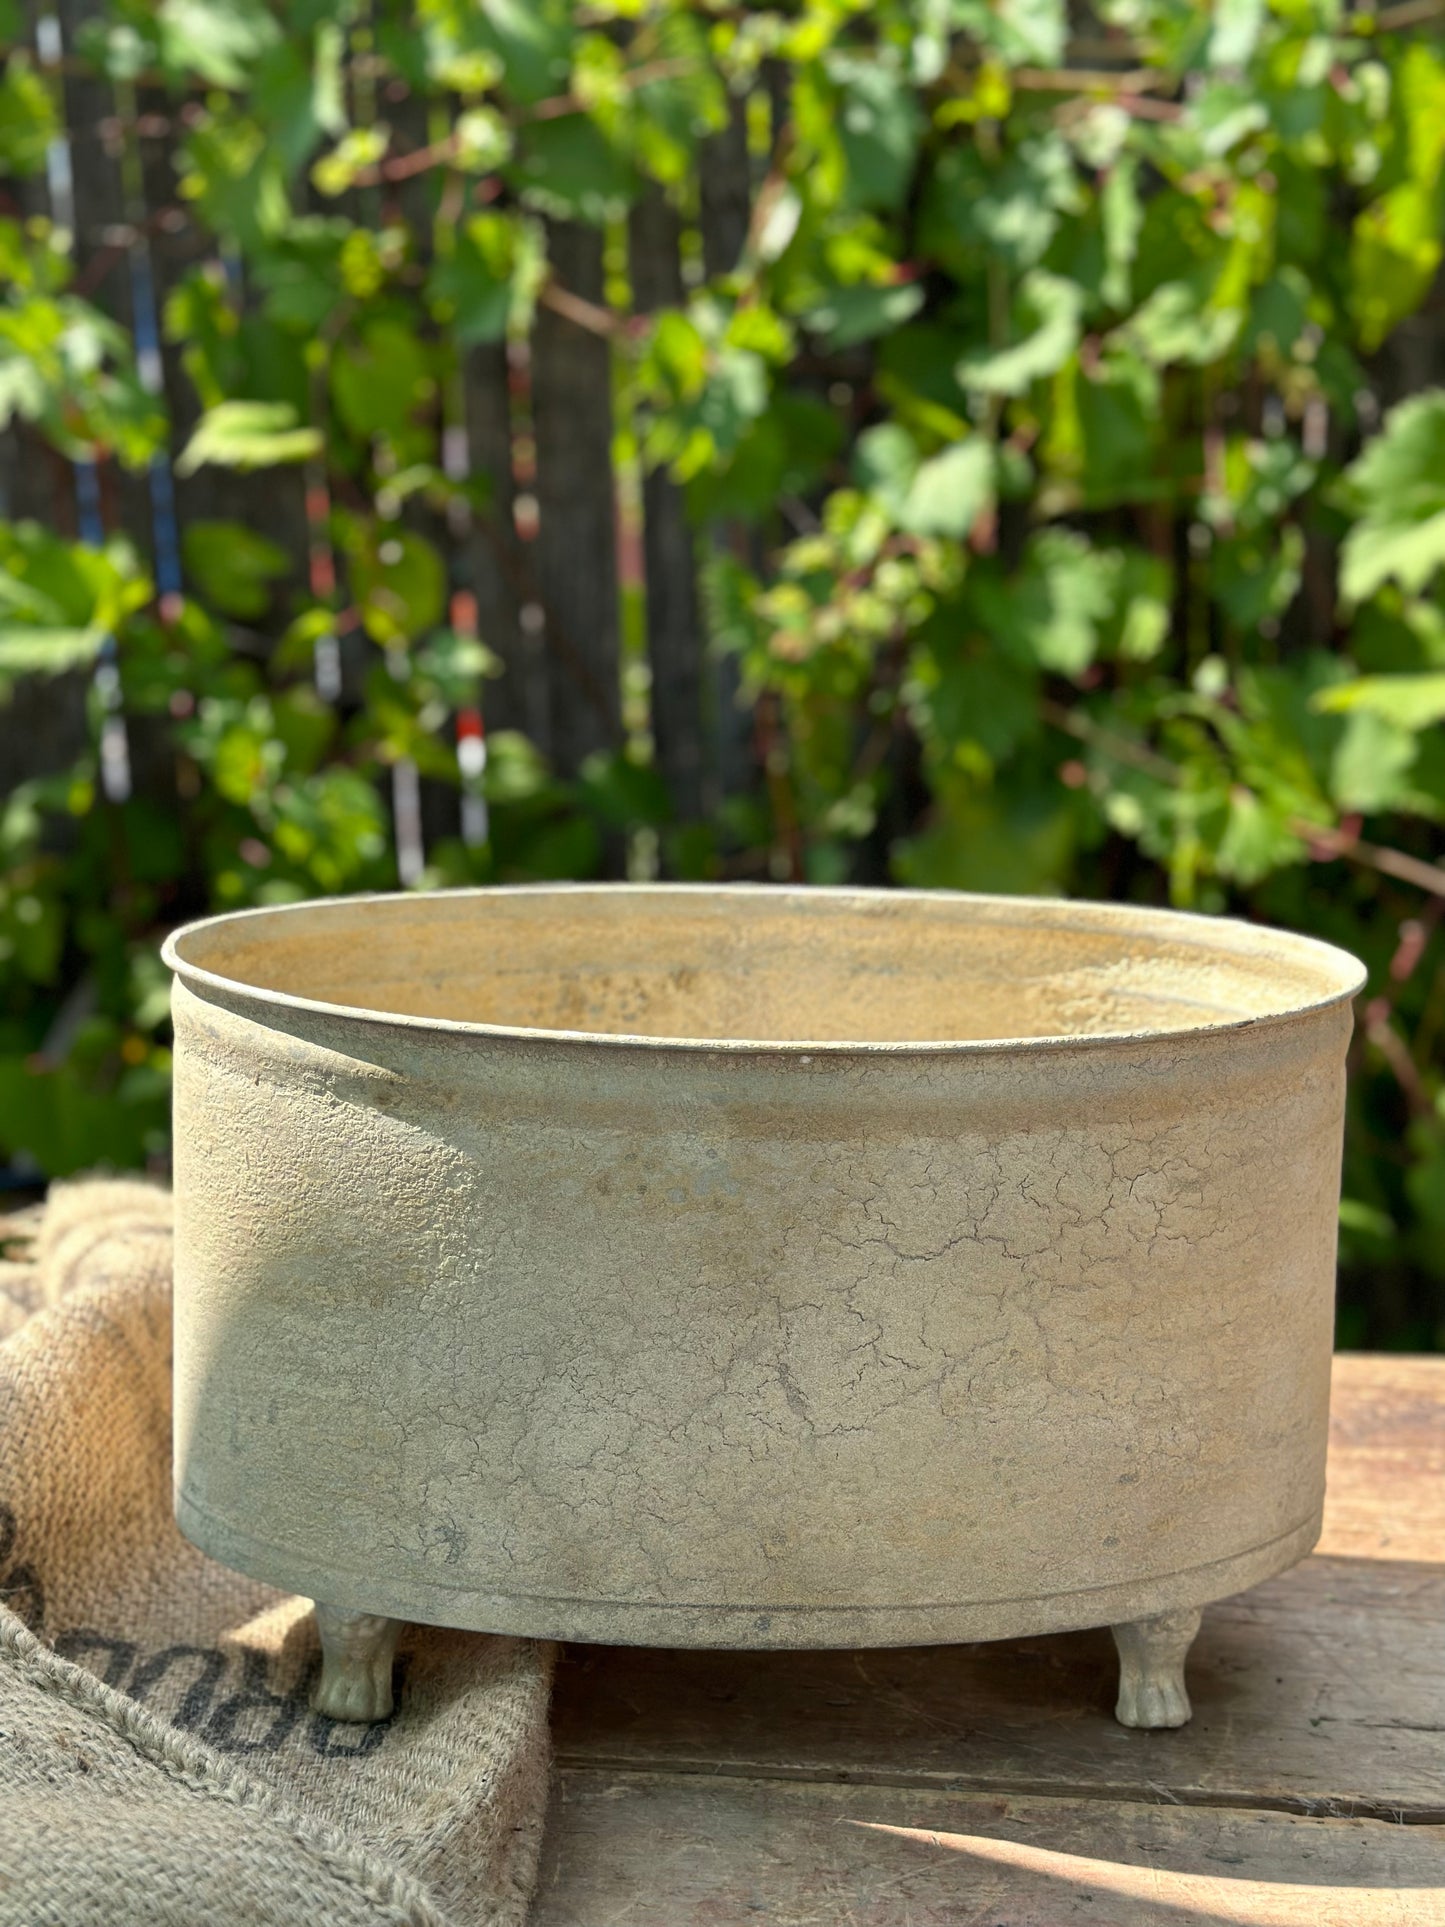 Distressed Metal - Cream Oval Planter with Feet